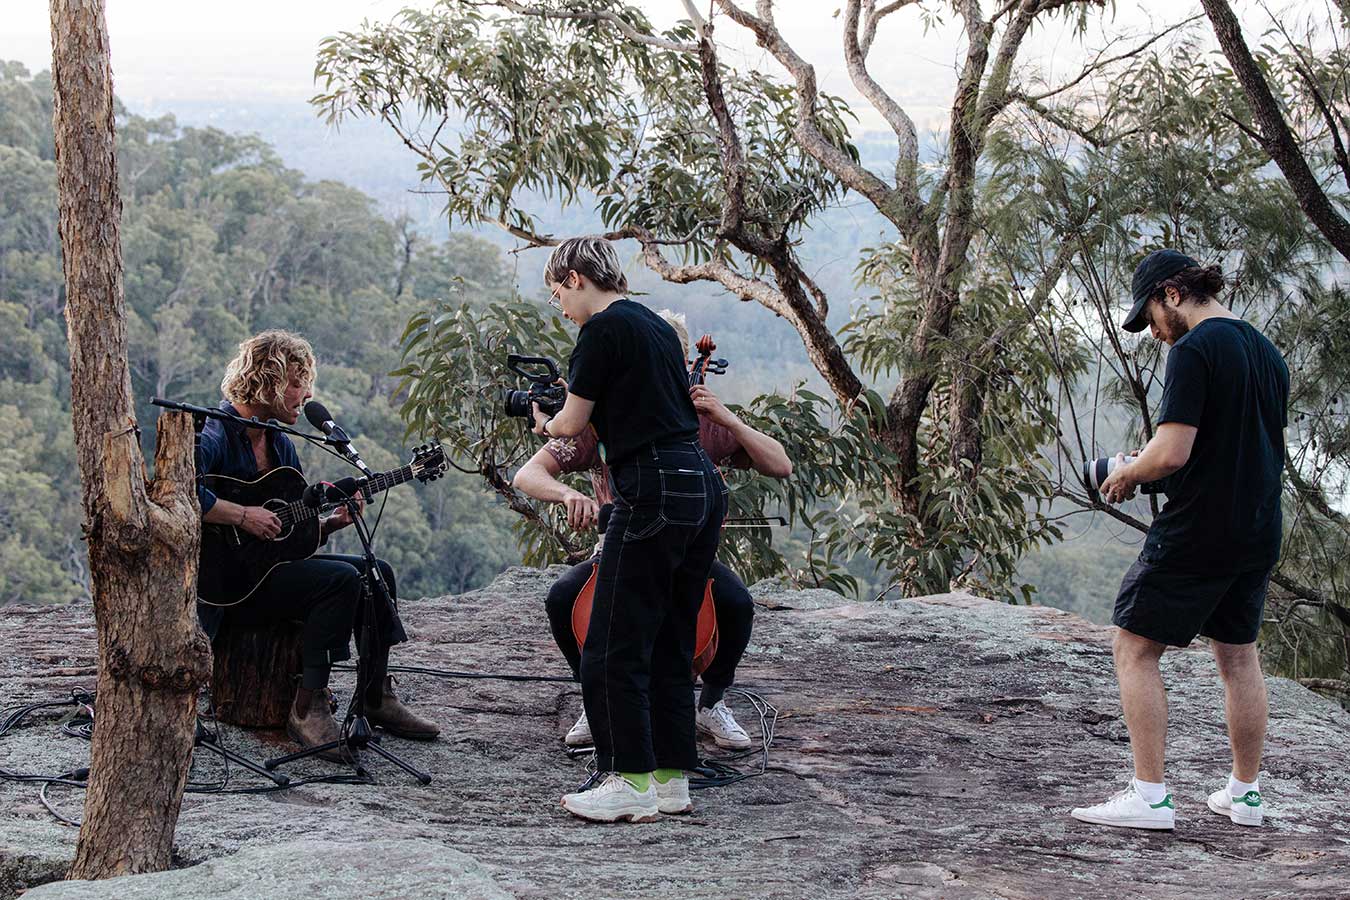 dop-kate-cornish-filming-kim-churchills-live-clip-with-the-canon-eos-c70-in-bushland-setting